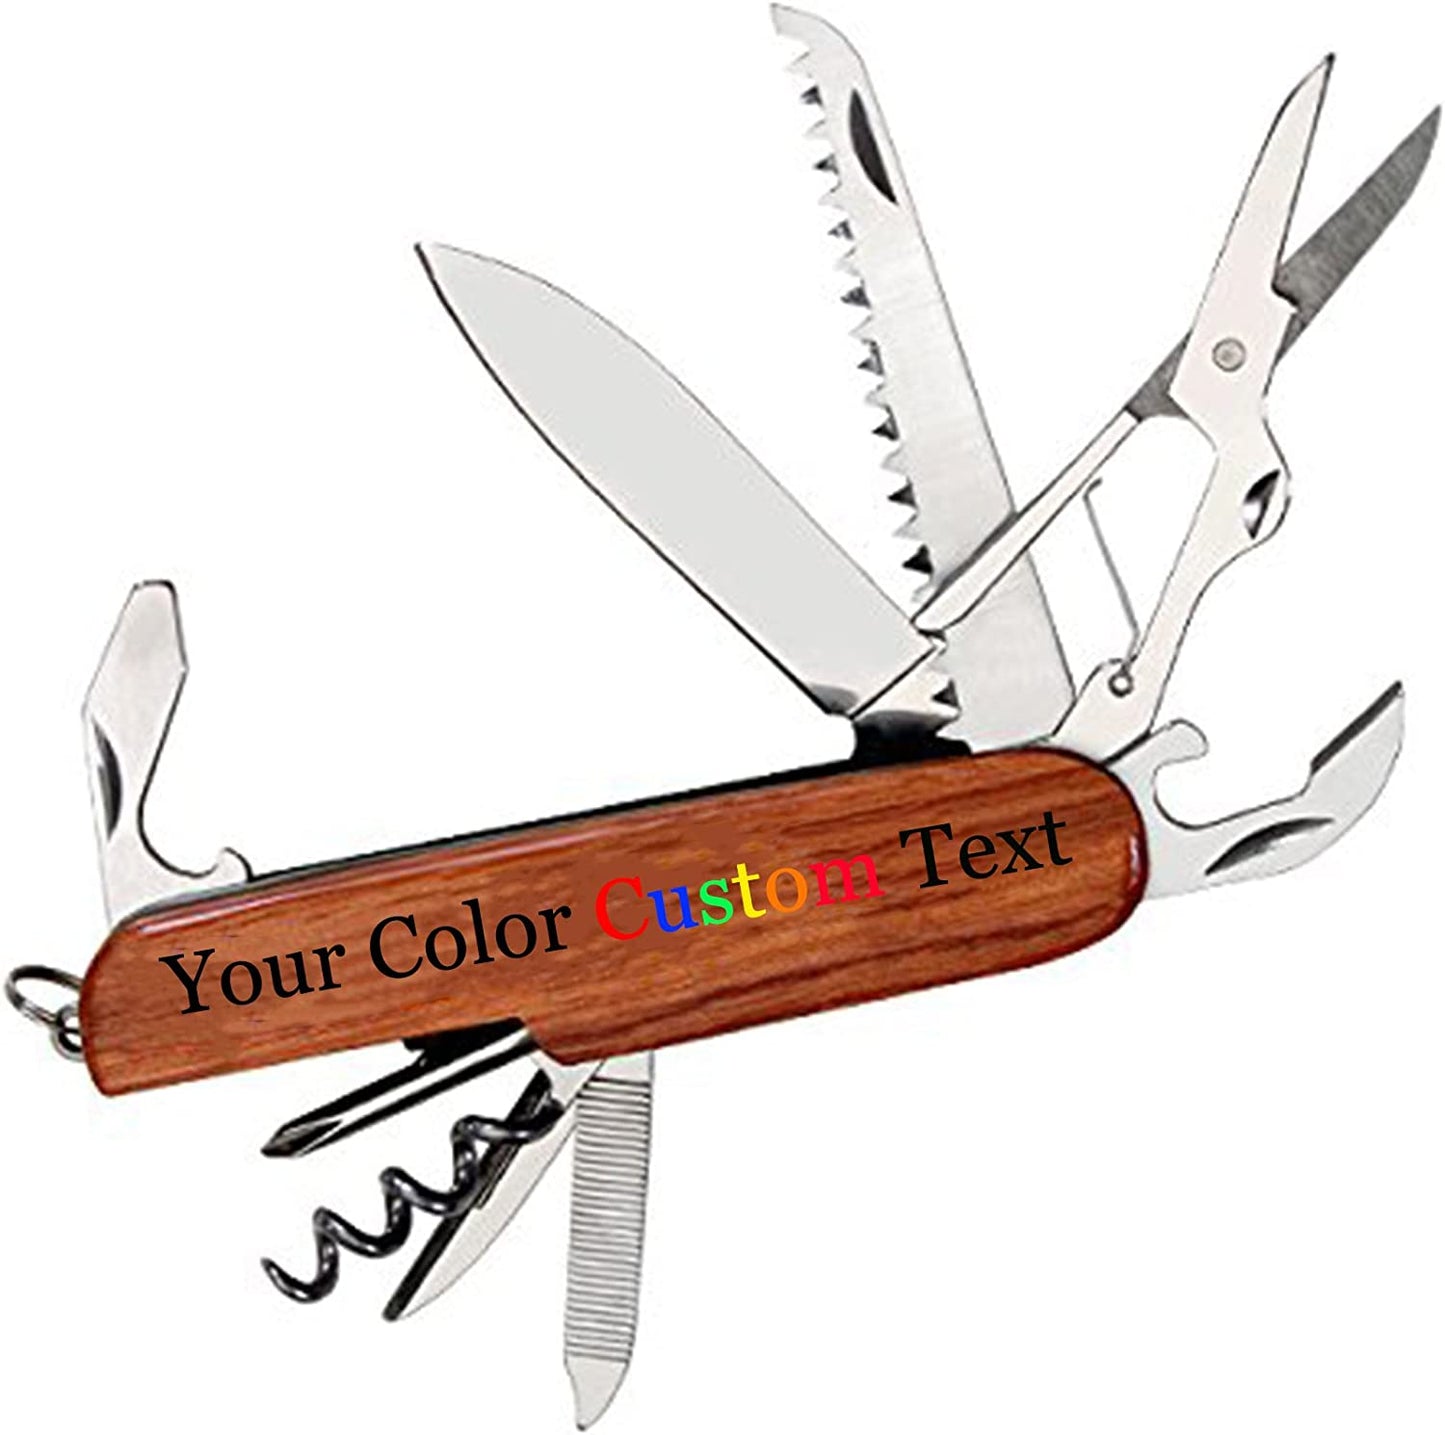 Customized Engraved OR Color Printed Multitool Pocket Knife - Add Your Text